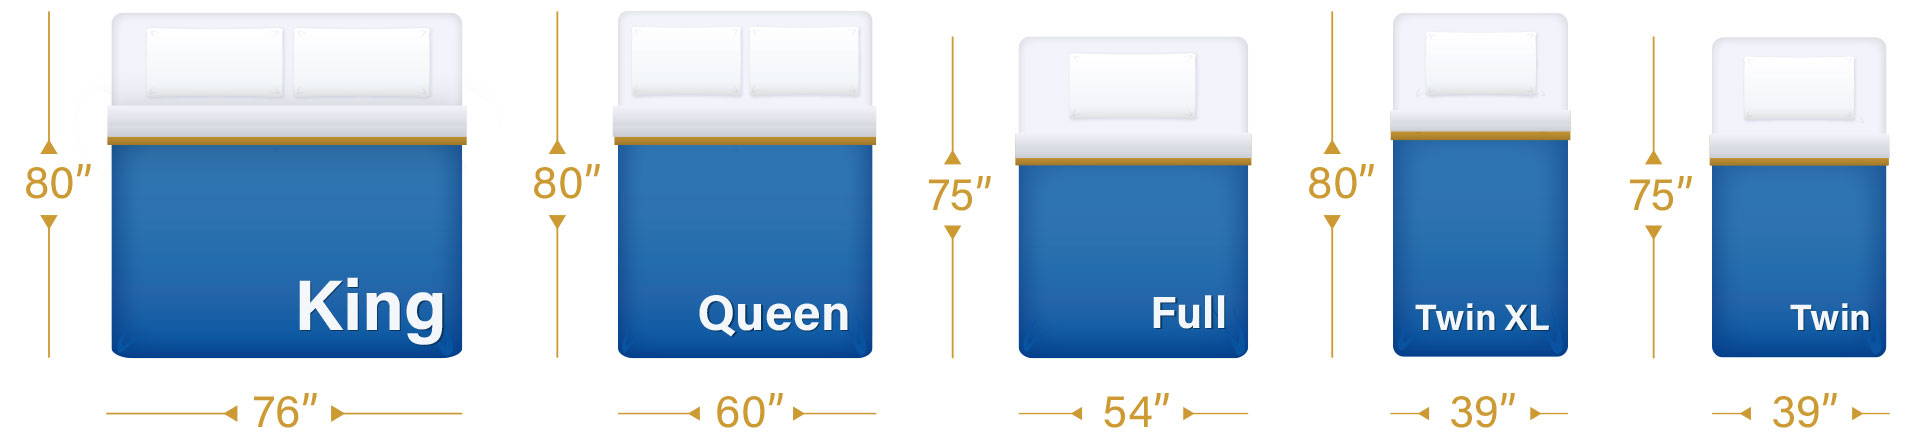 Mattress Size Guide for the most common sizes